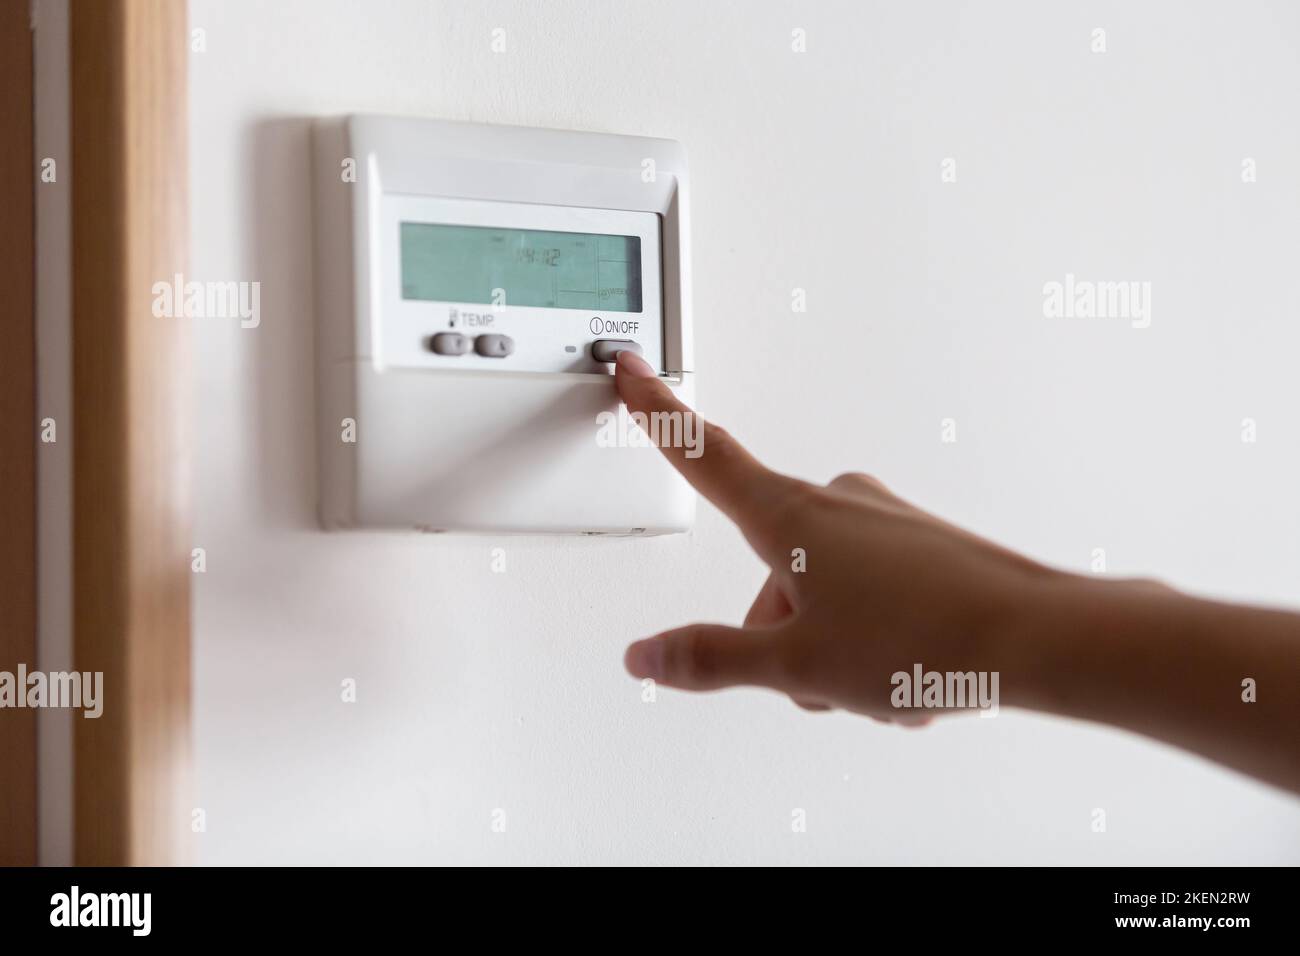 Close-up of a young woman's hand pressing the on/off button of the air conditioner or heater Stock Photo